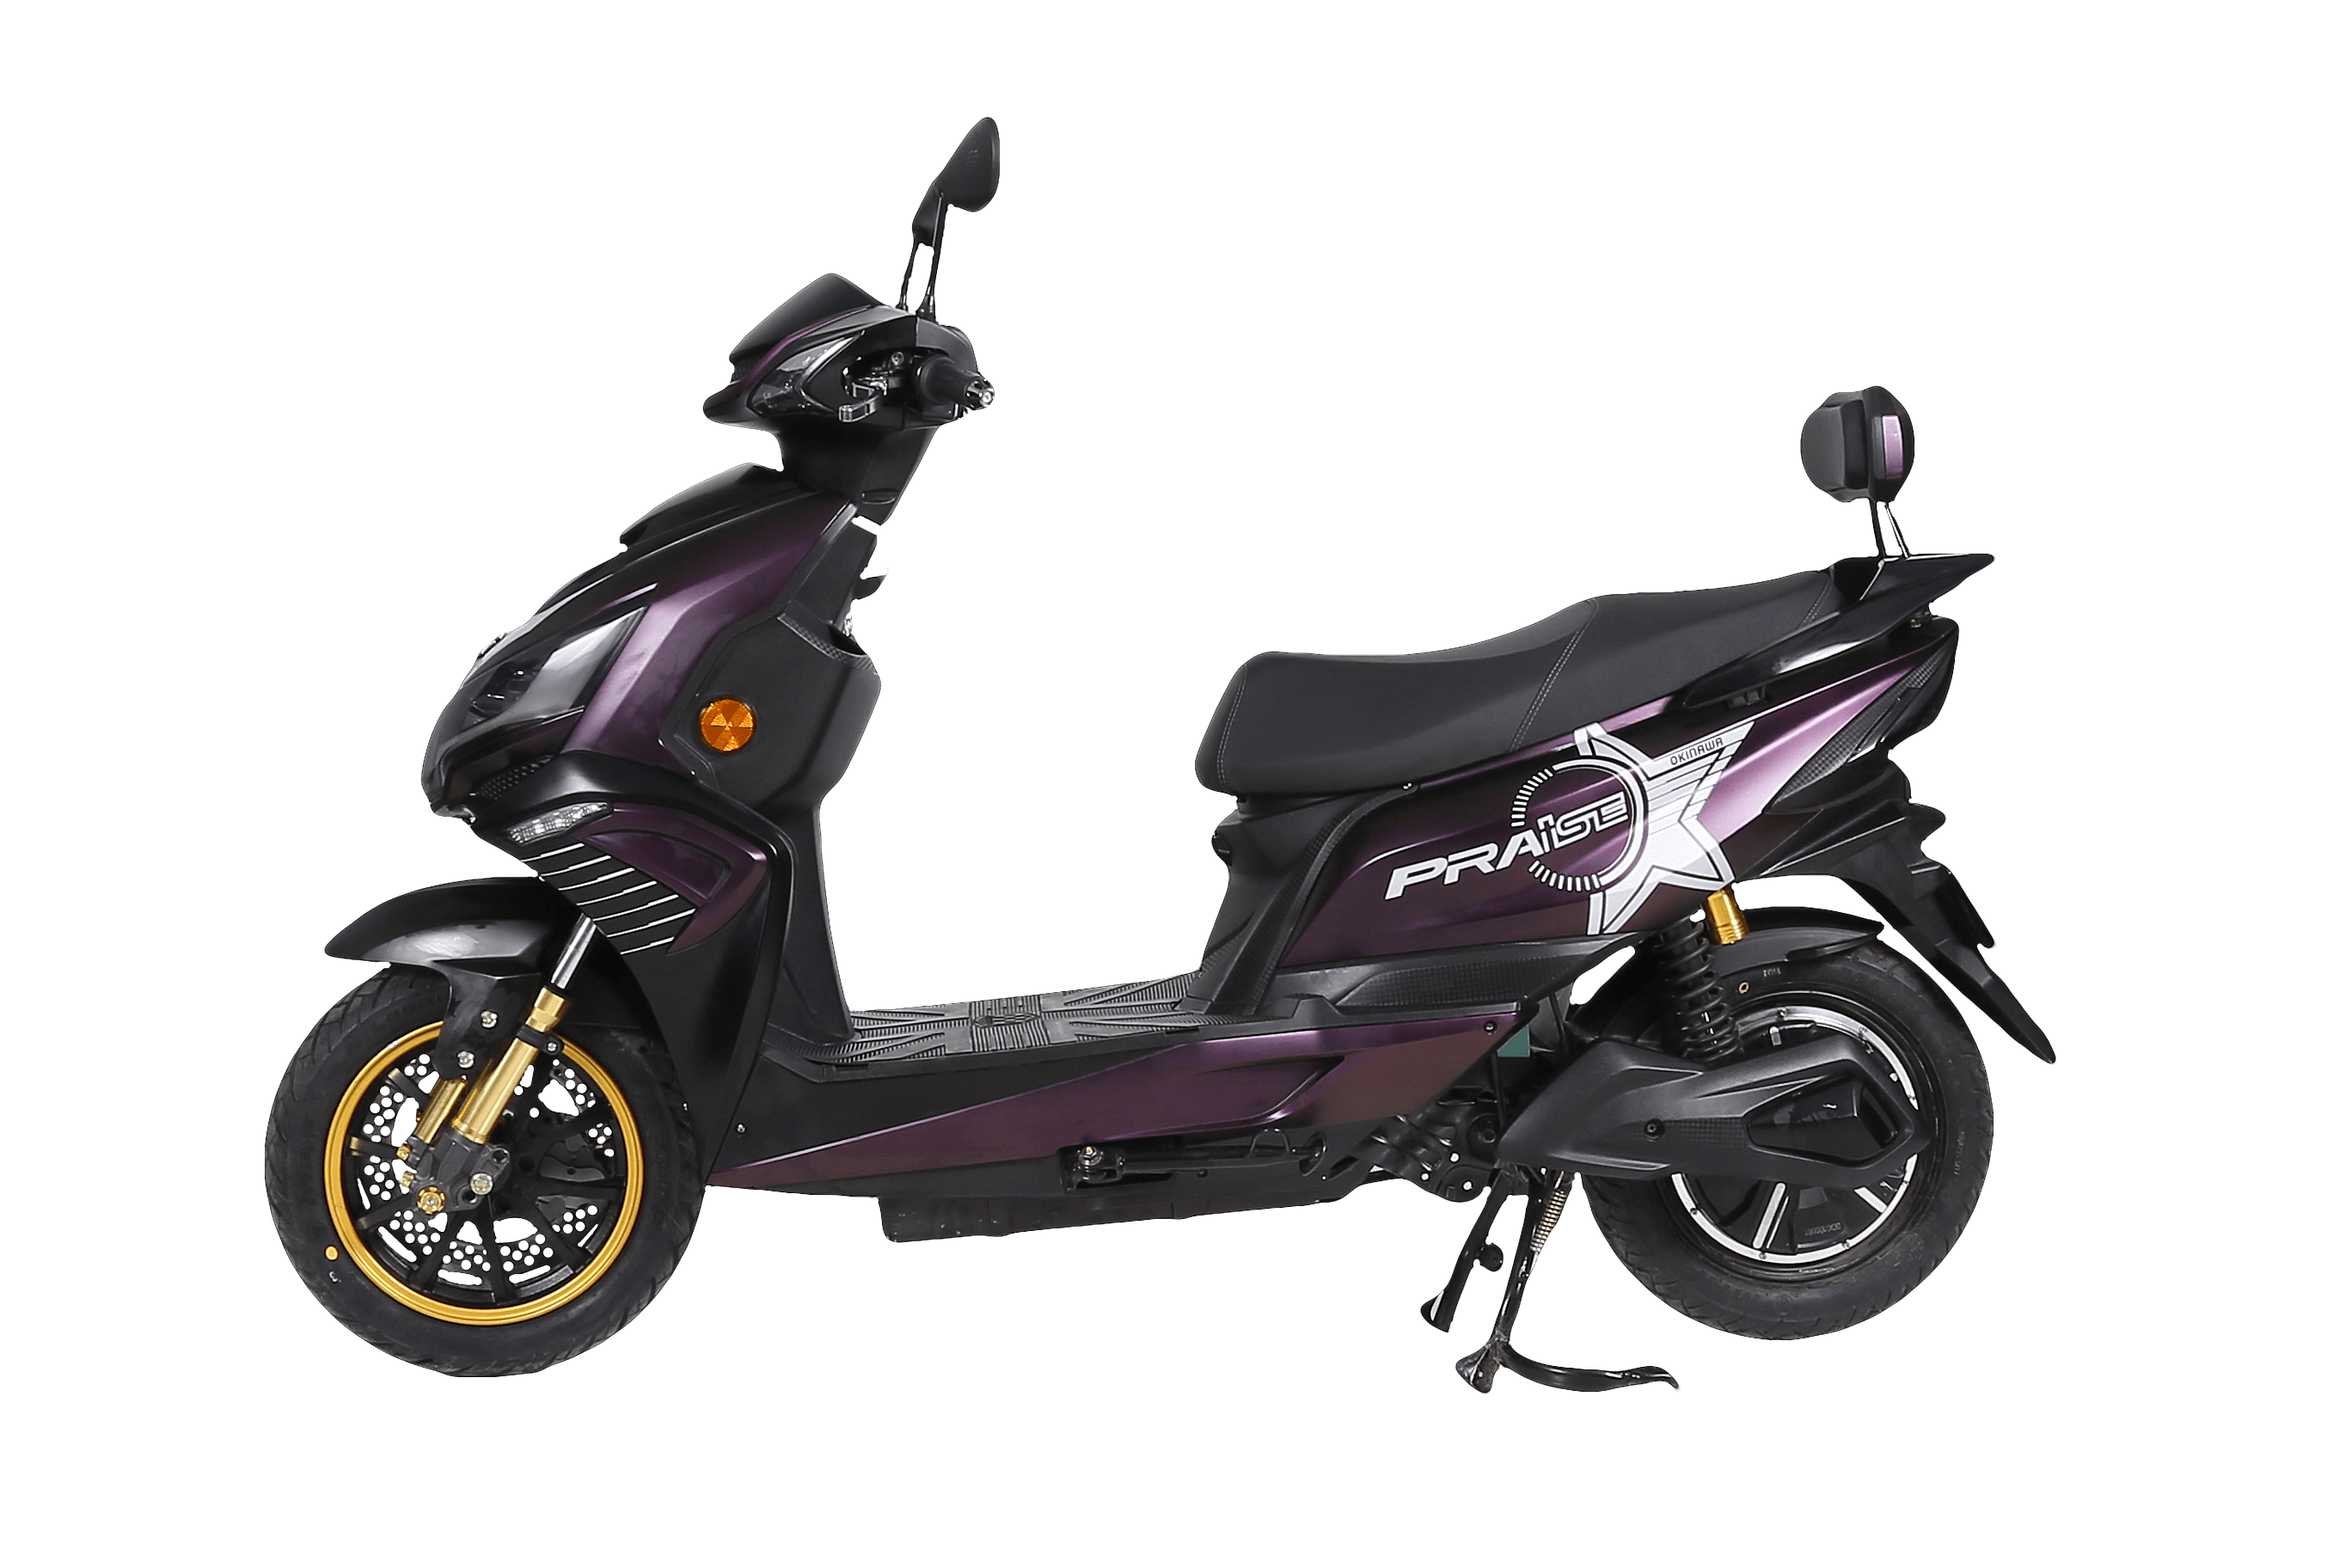 Okinawa Praise Electric Scooter Price in India, Specifications, Range, Pics